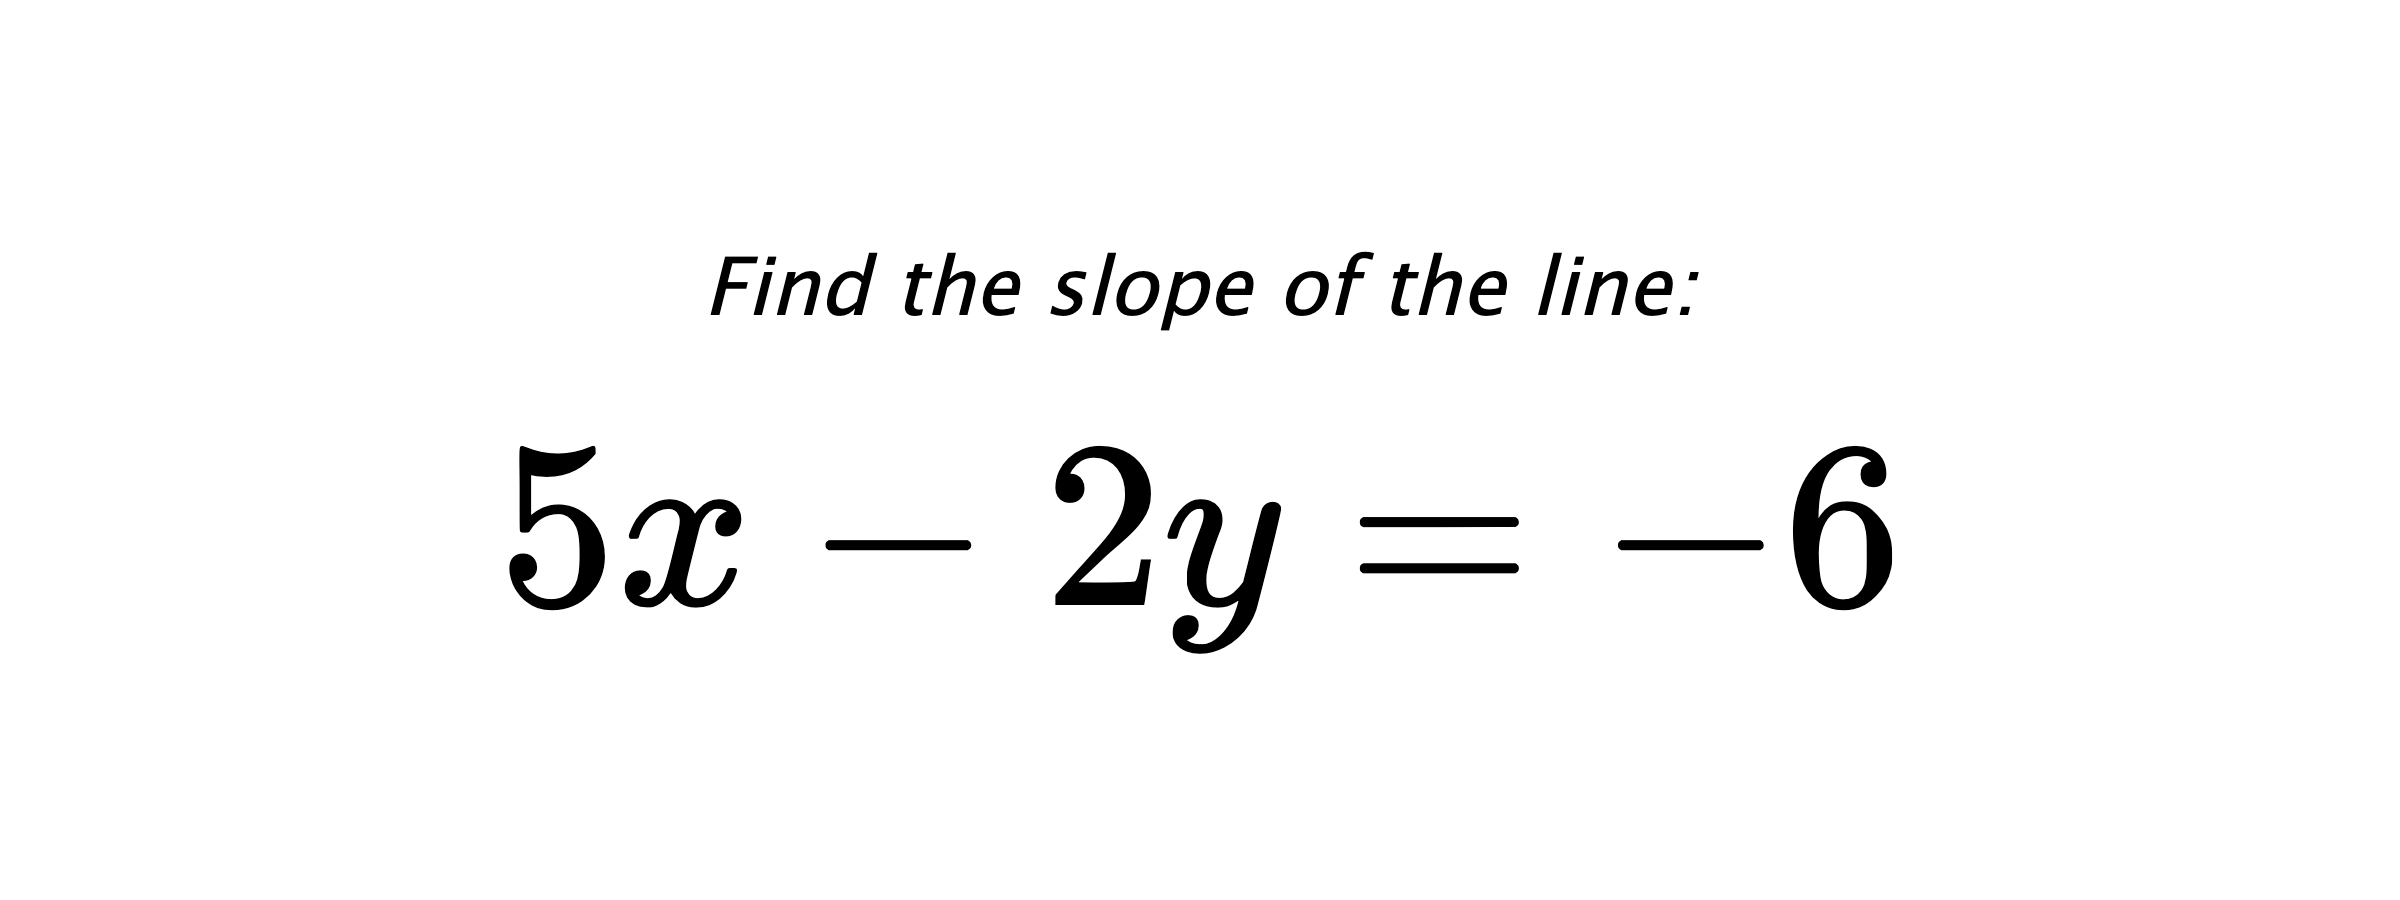 Find the slope of the line: $ 5x-2y=-6 $